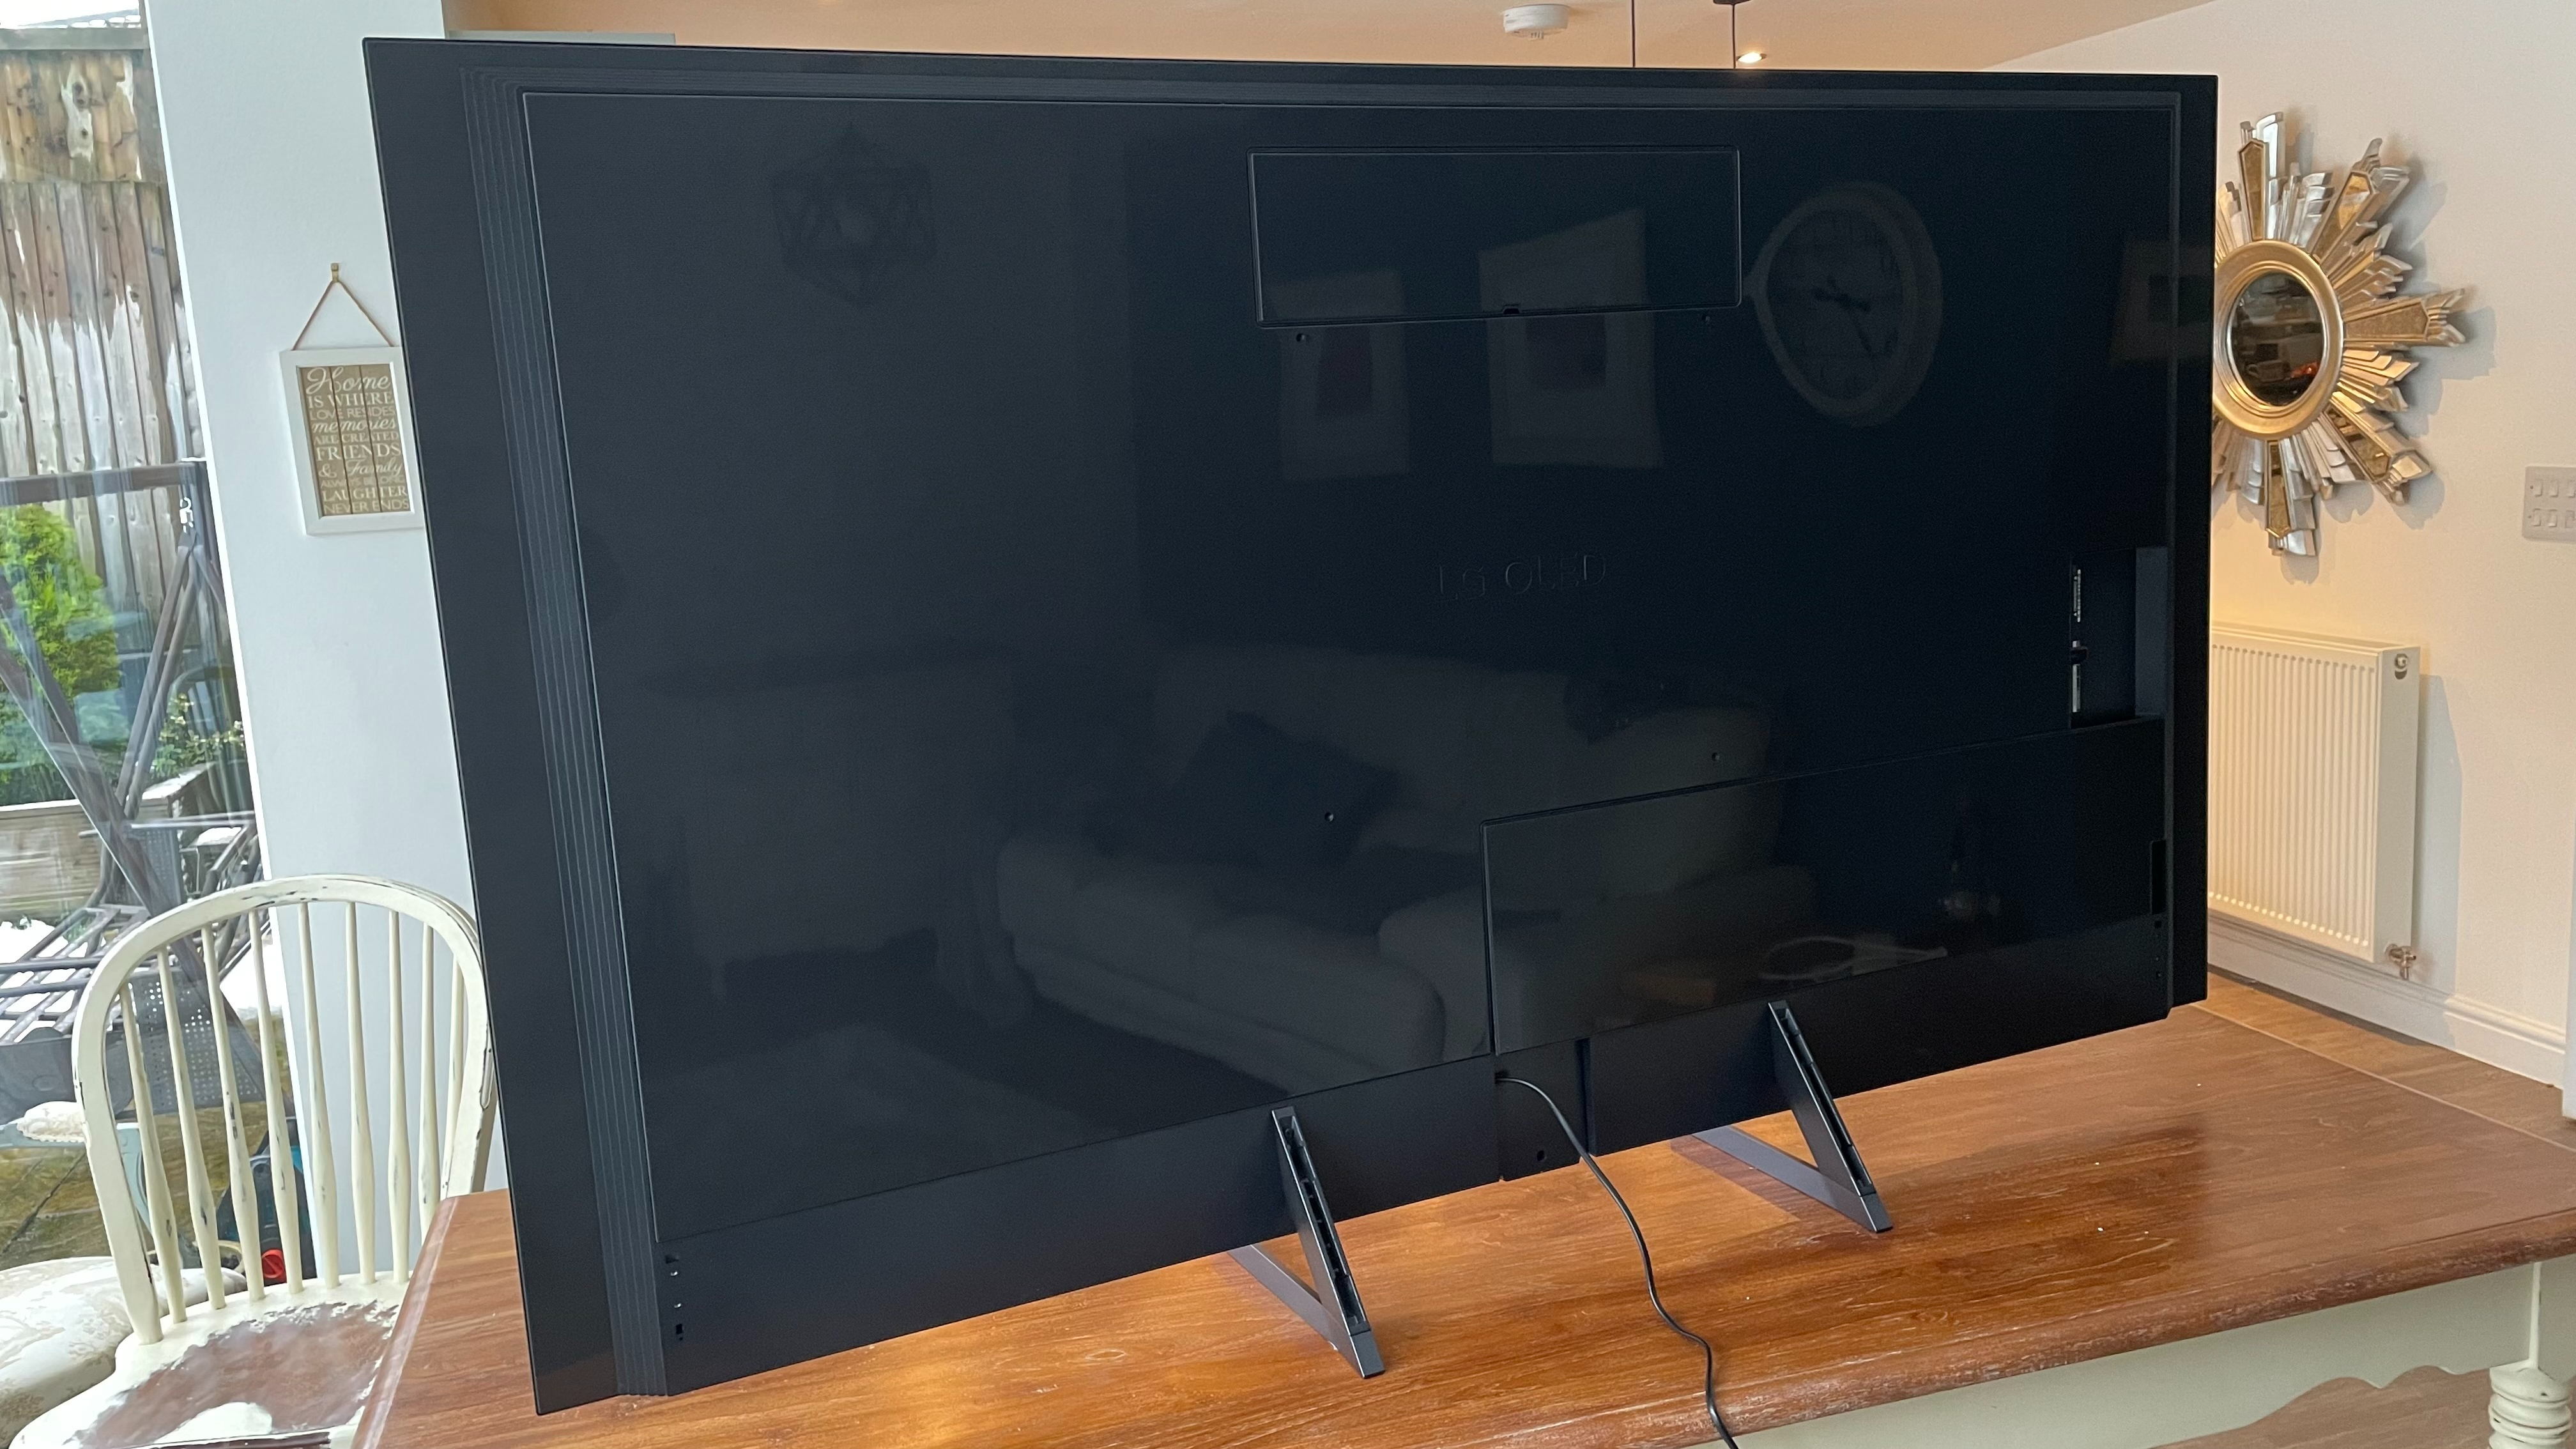 LG Z3 OLED TV shown from rear